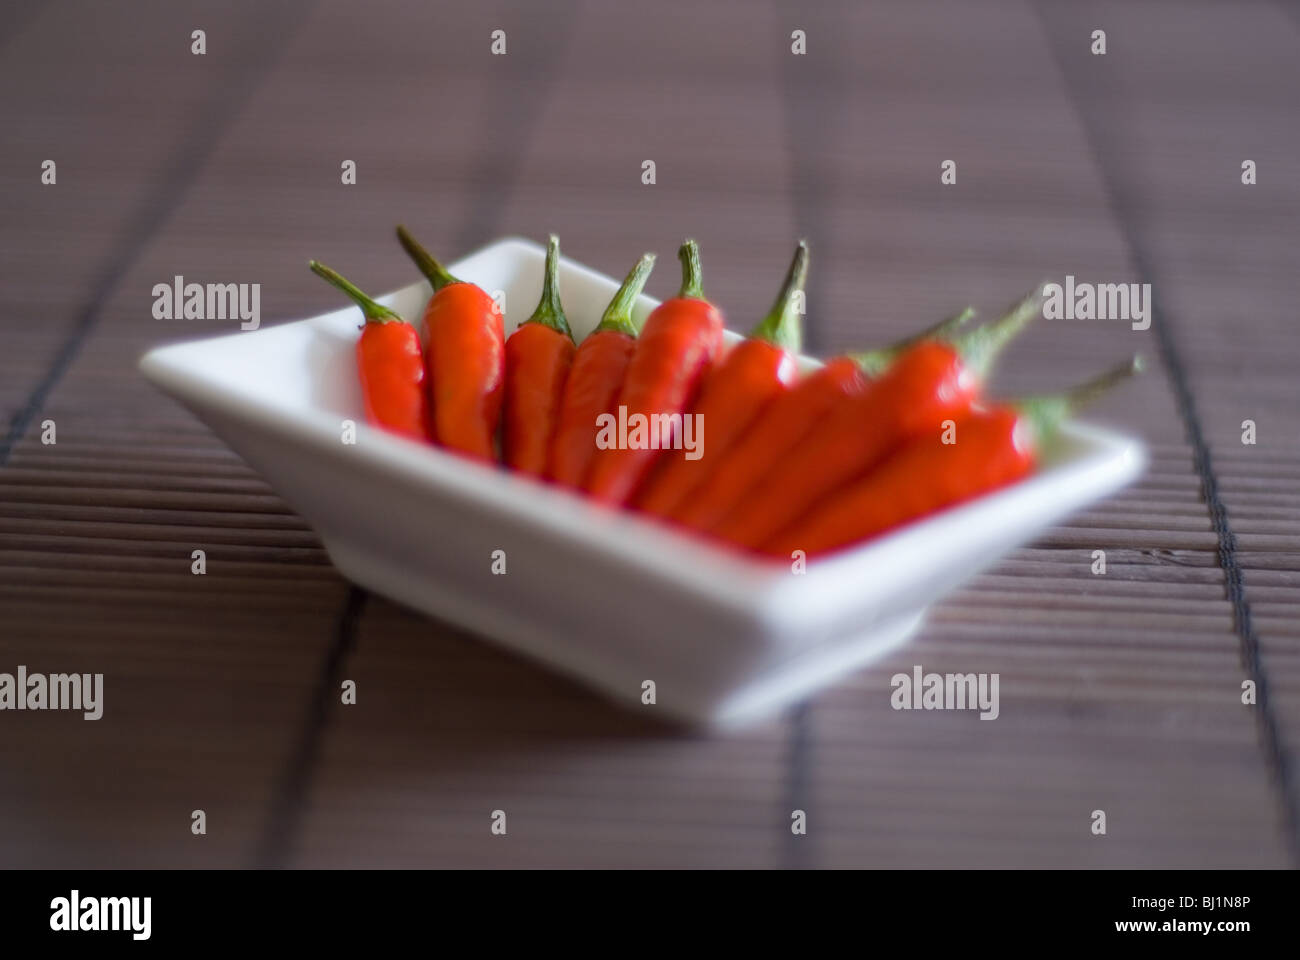 An Asian style square bowl of whole red chillis on a bamboo surface Stock Photo